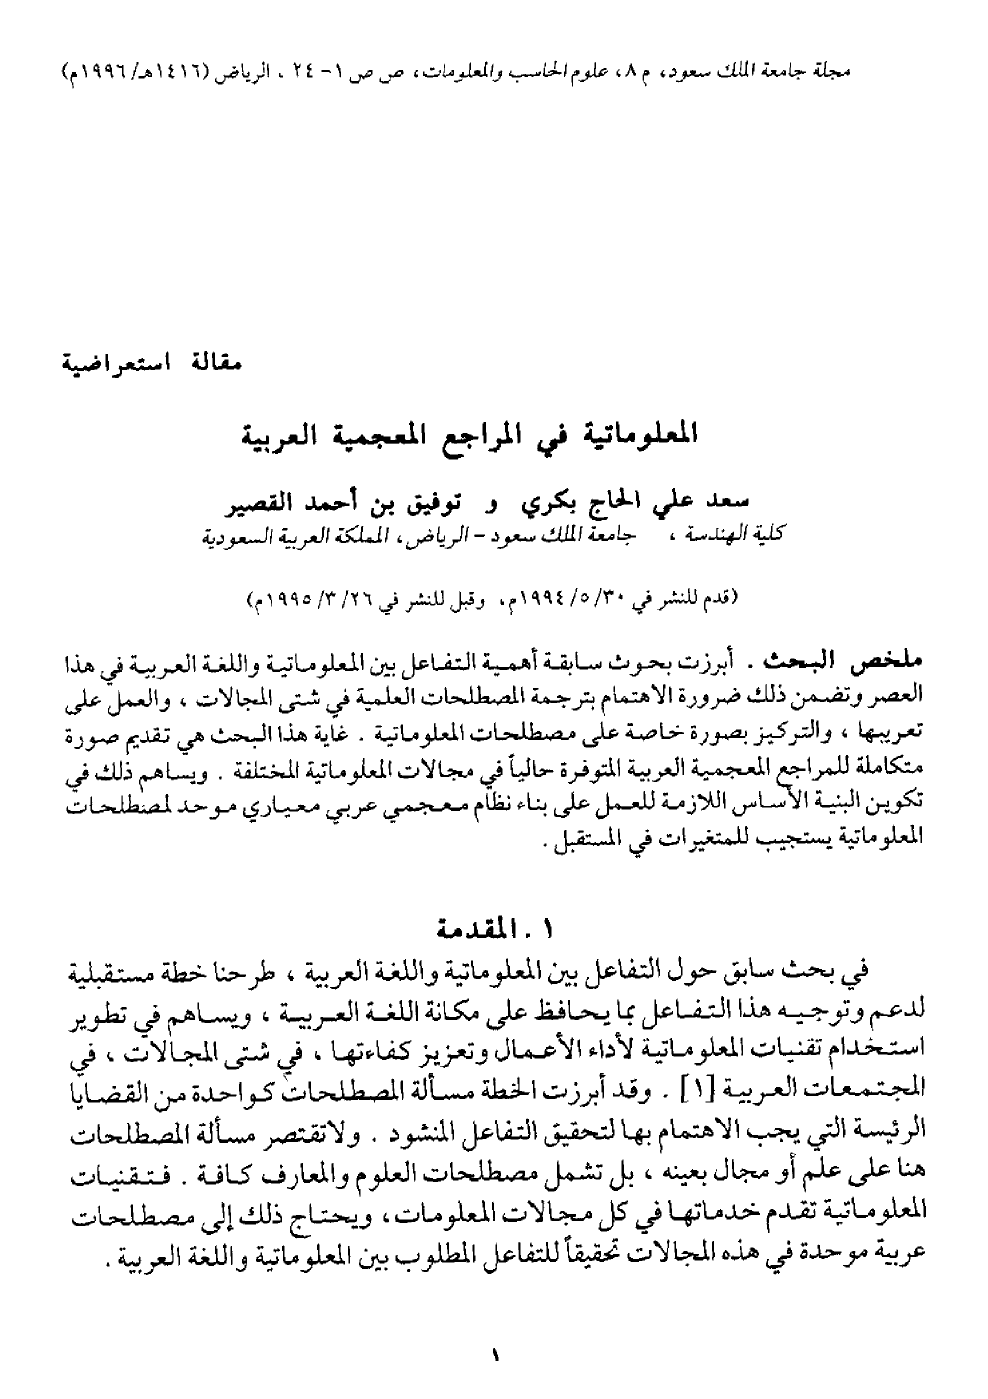 Informatics In Arabic Dictionaries Topic Of Research Paper In Computer And Information Sciences Download Scholarly Article Pdf And Read For Free On Cyberleninka Open Science Hub